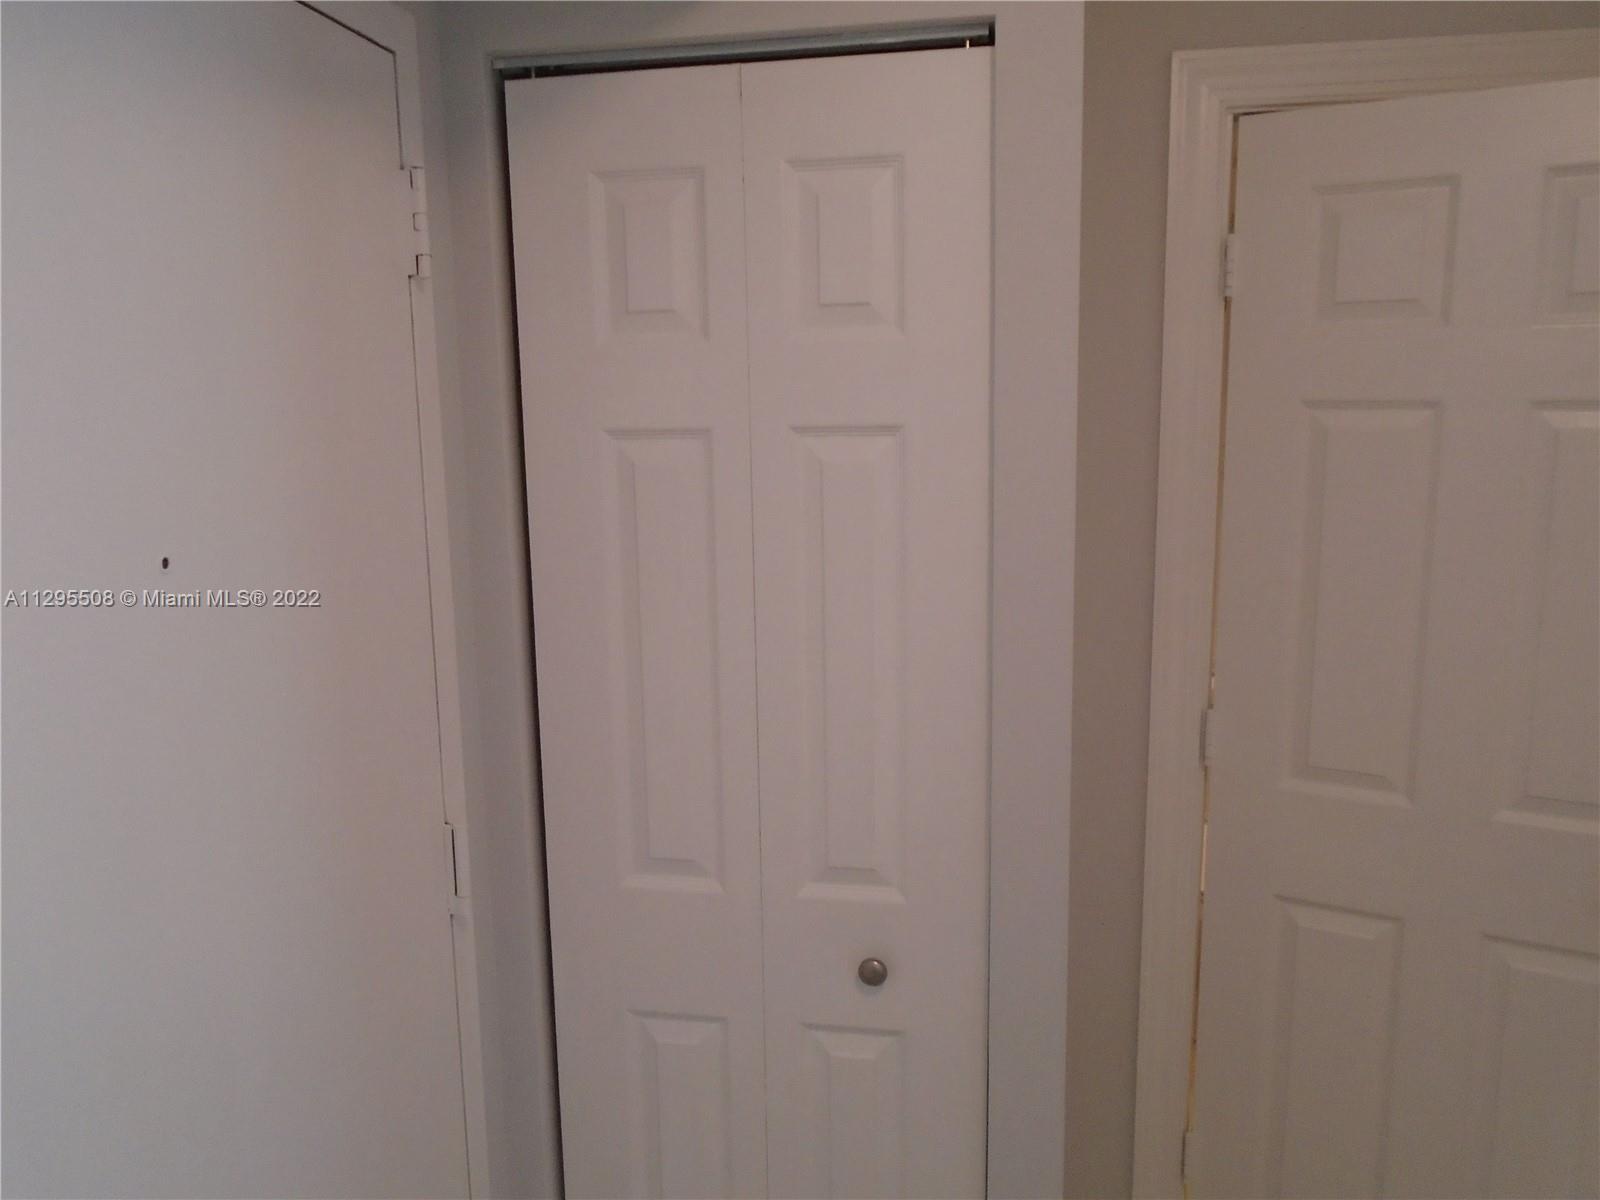 Extra closet by the entrance